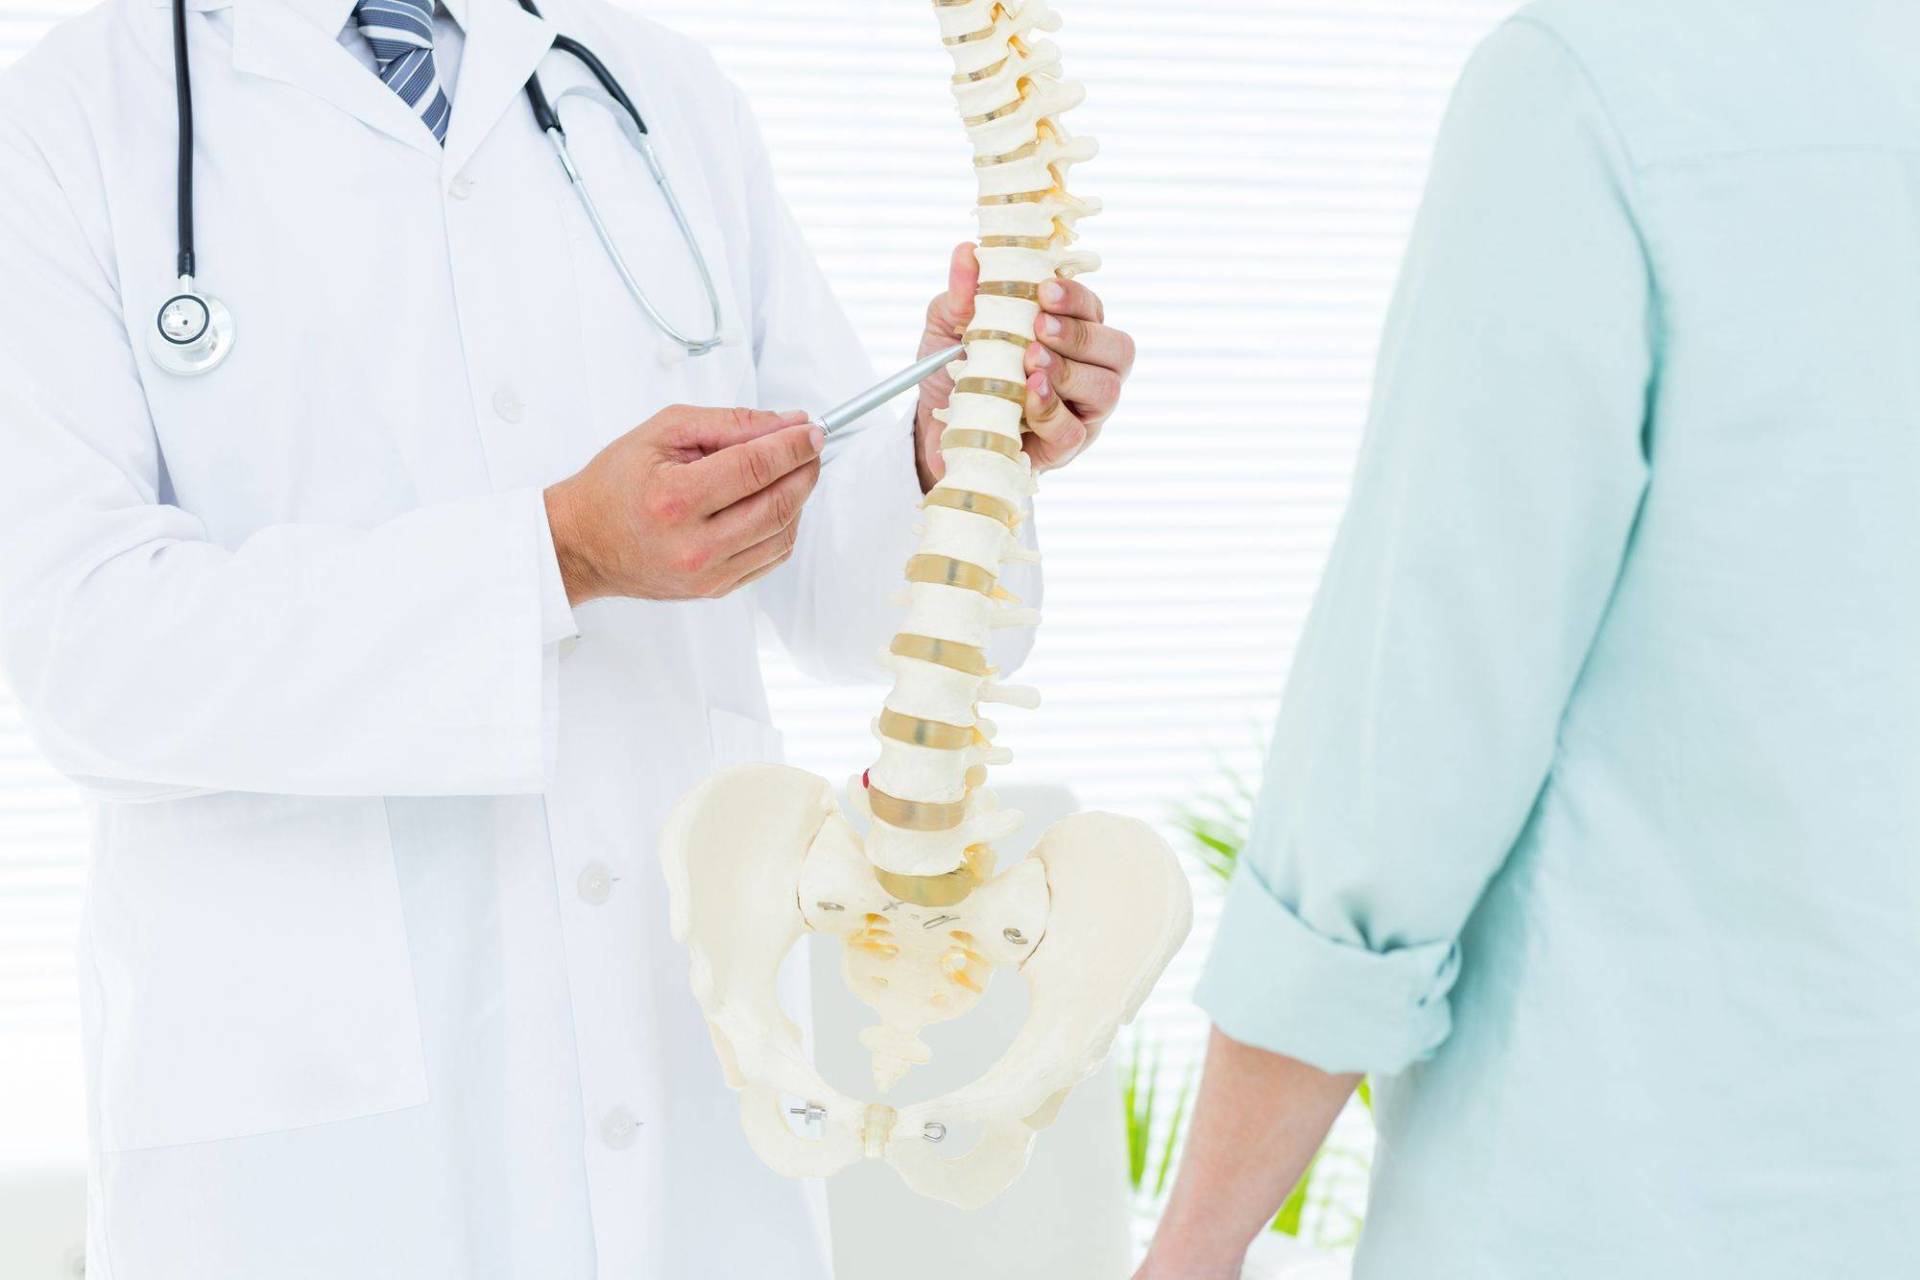 Qualified chiropractic practitioners